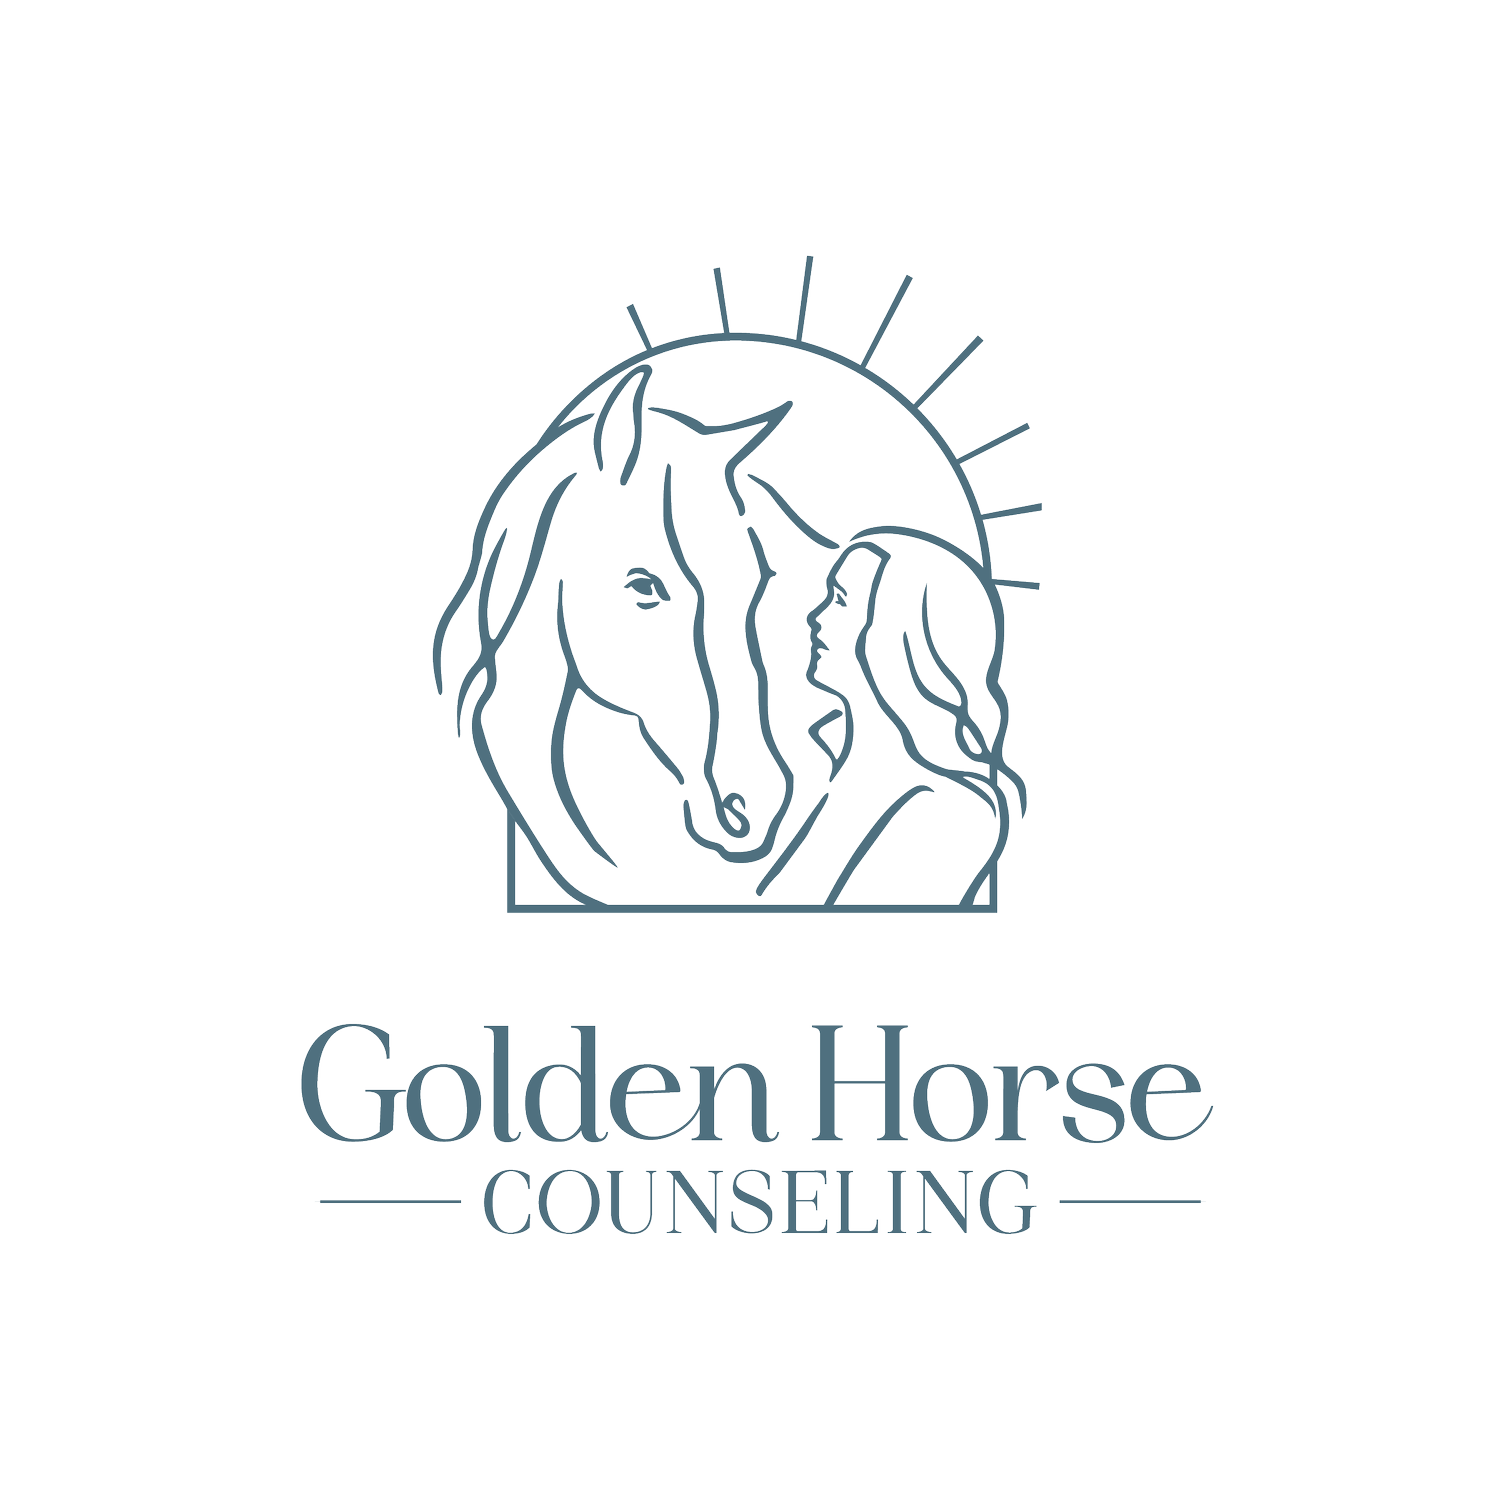 Golden Horse Counseling